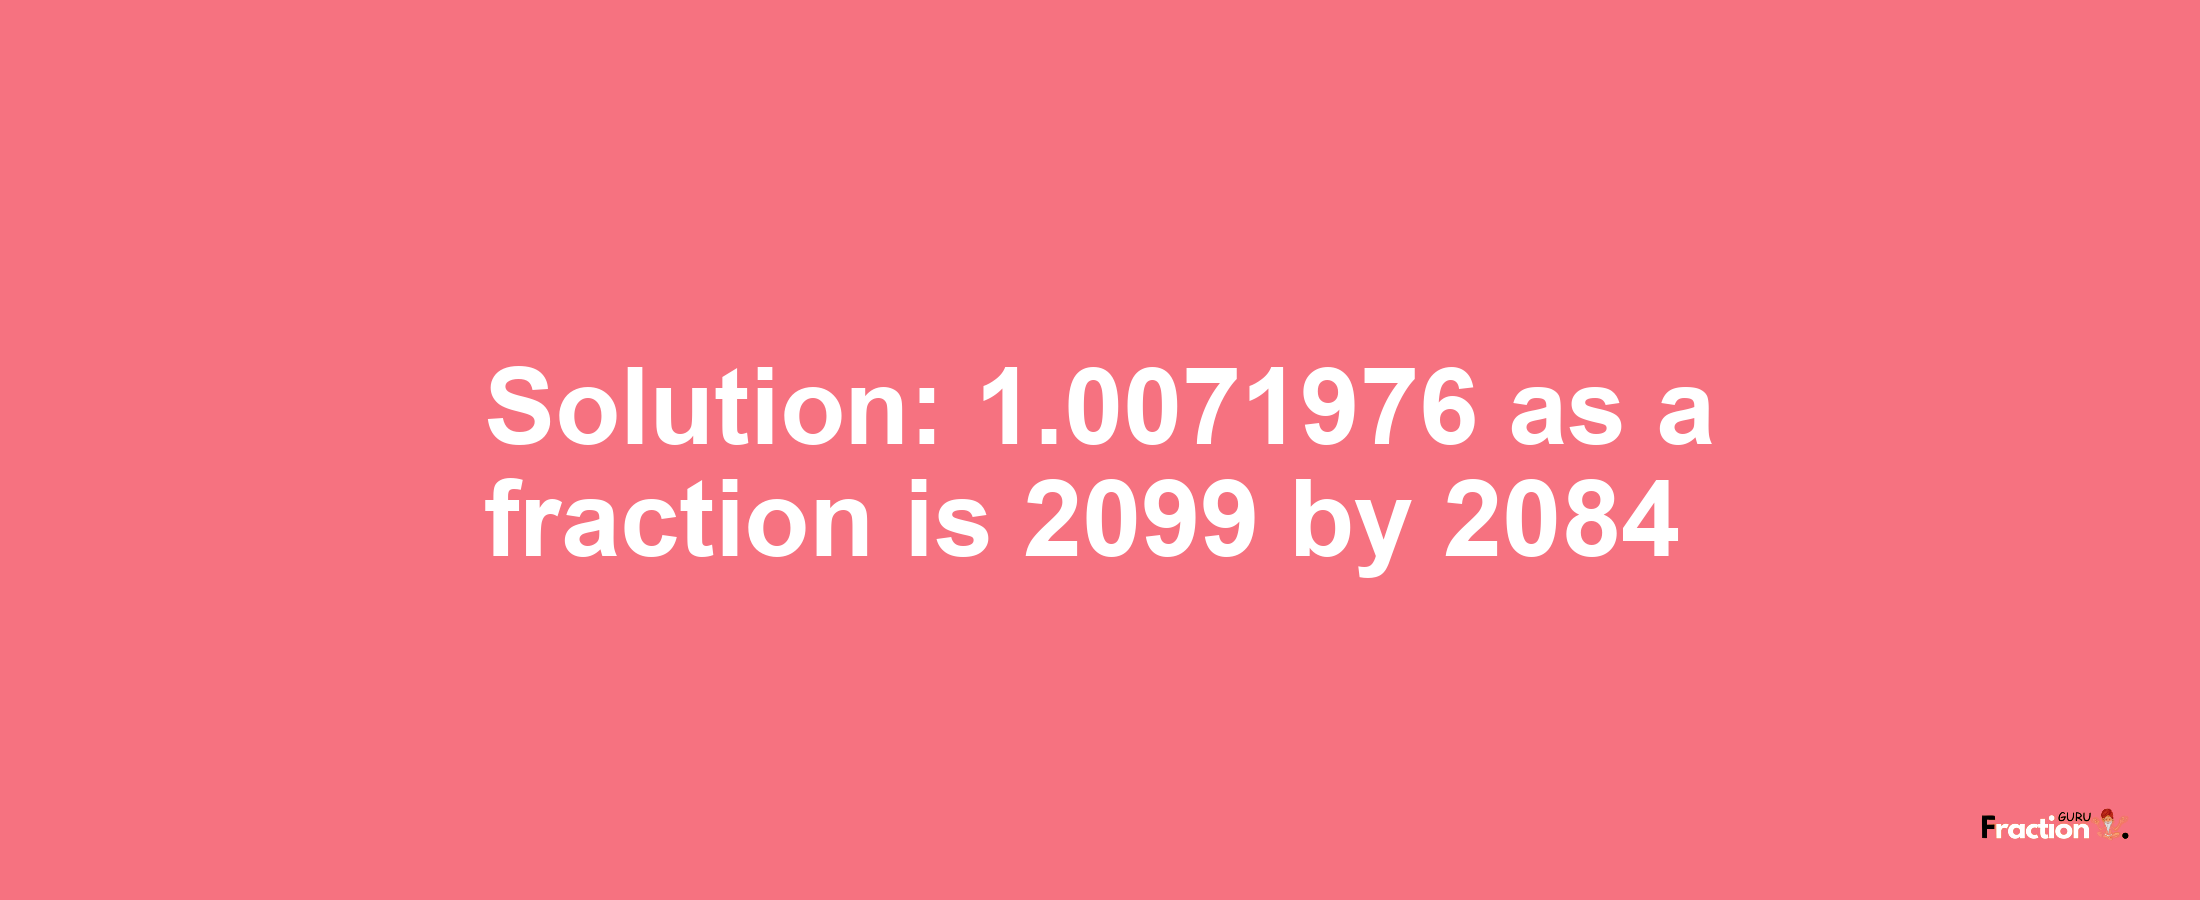 Solution:1.0071976 as a fraction is 2099/2084